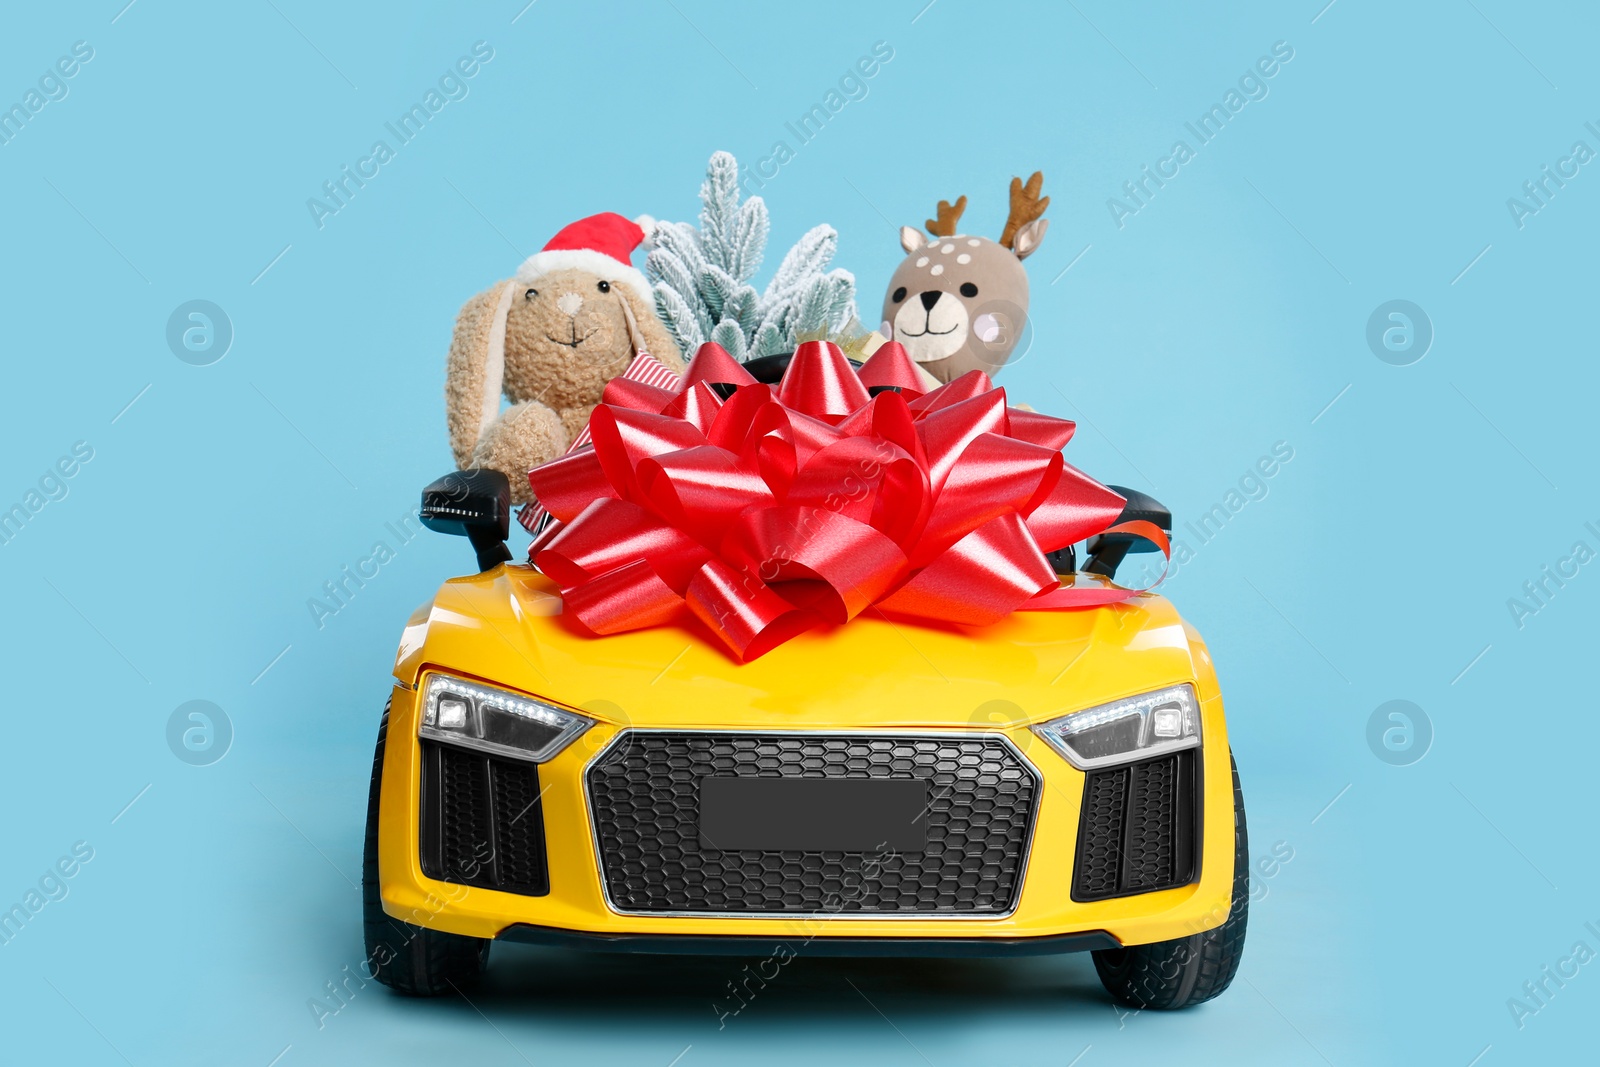 Photo of Child's electric car with toys and Christmas decor on light blue background